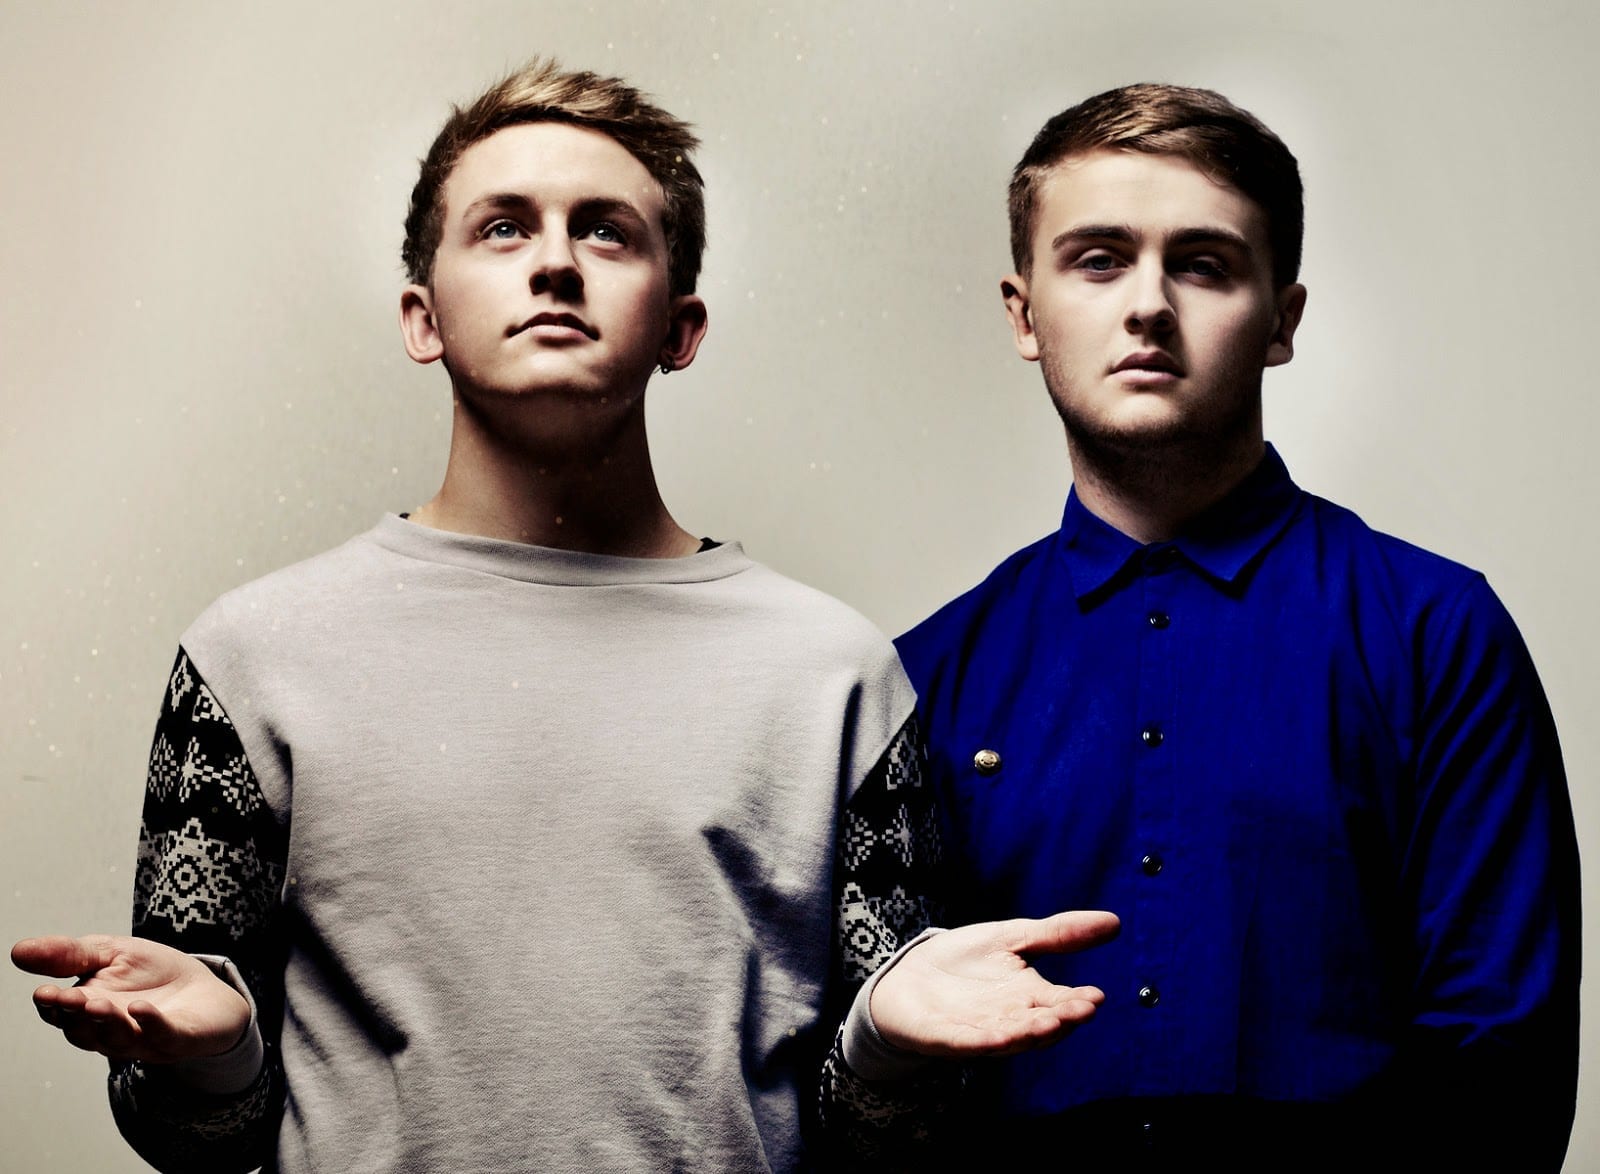 Track Review: Magnets // Disclosure ft. Lorde